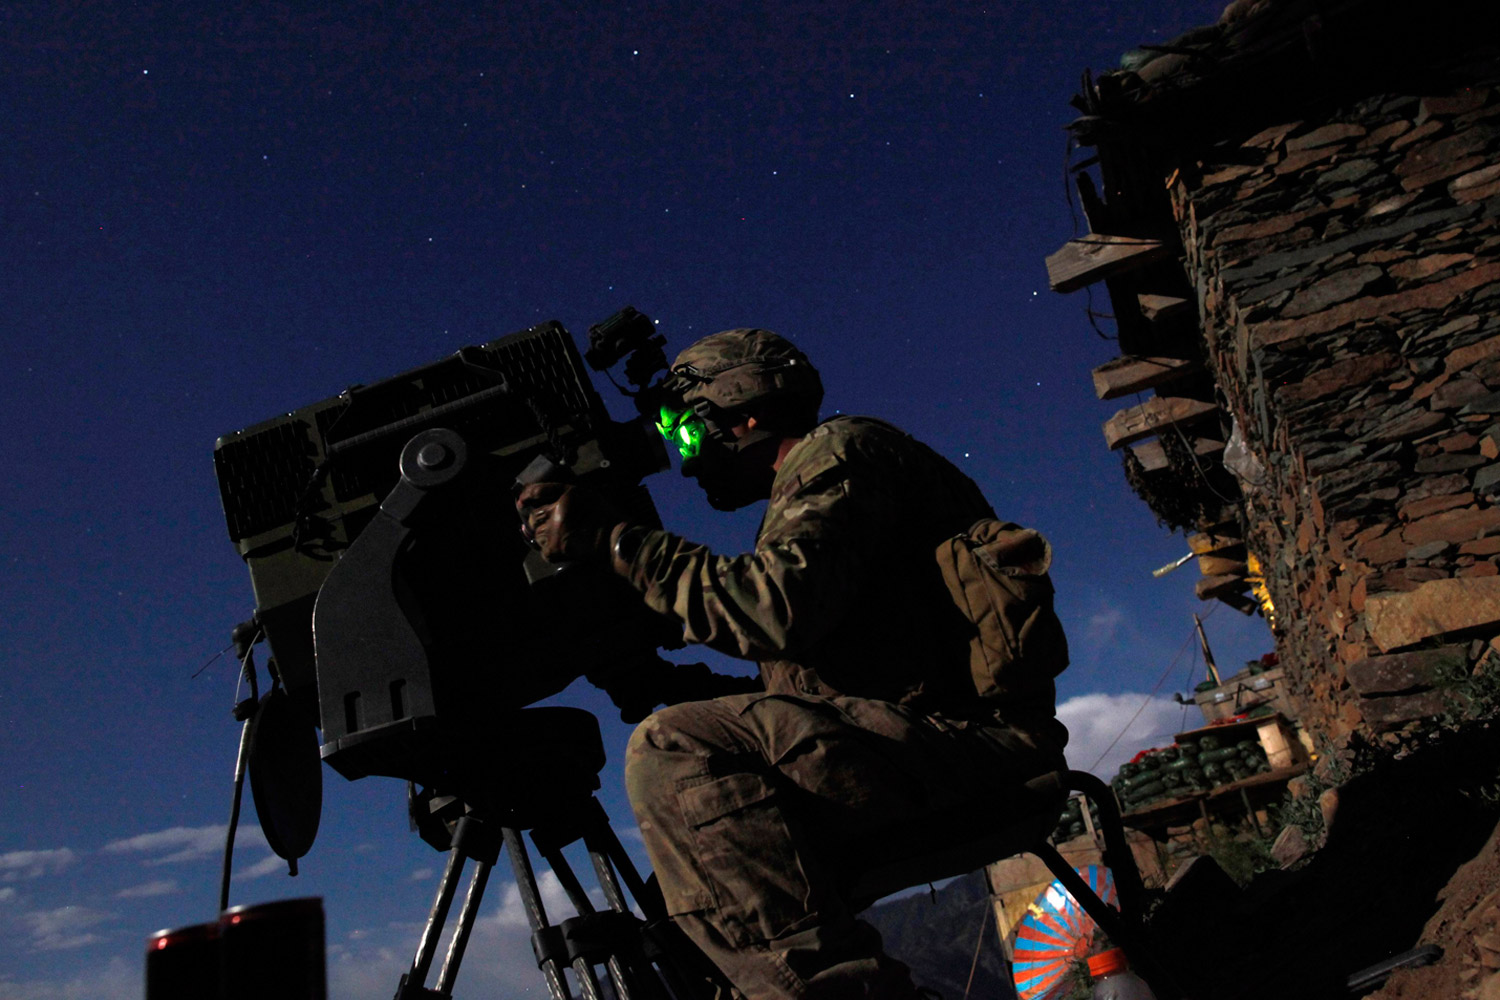 June 5, 2012. A soldier from the United States Army's Charlie Company, 1-12 Infantry, 4th Brigade, 4th Infantry Division keeps watch at night at Observation Post Mustang in Afghanistan's Kunar Province.